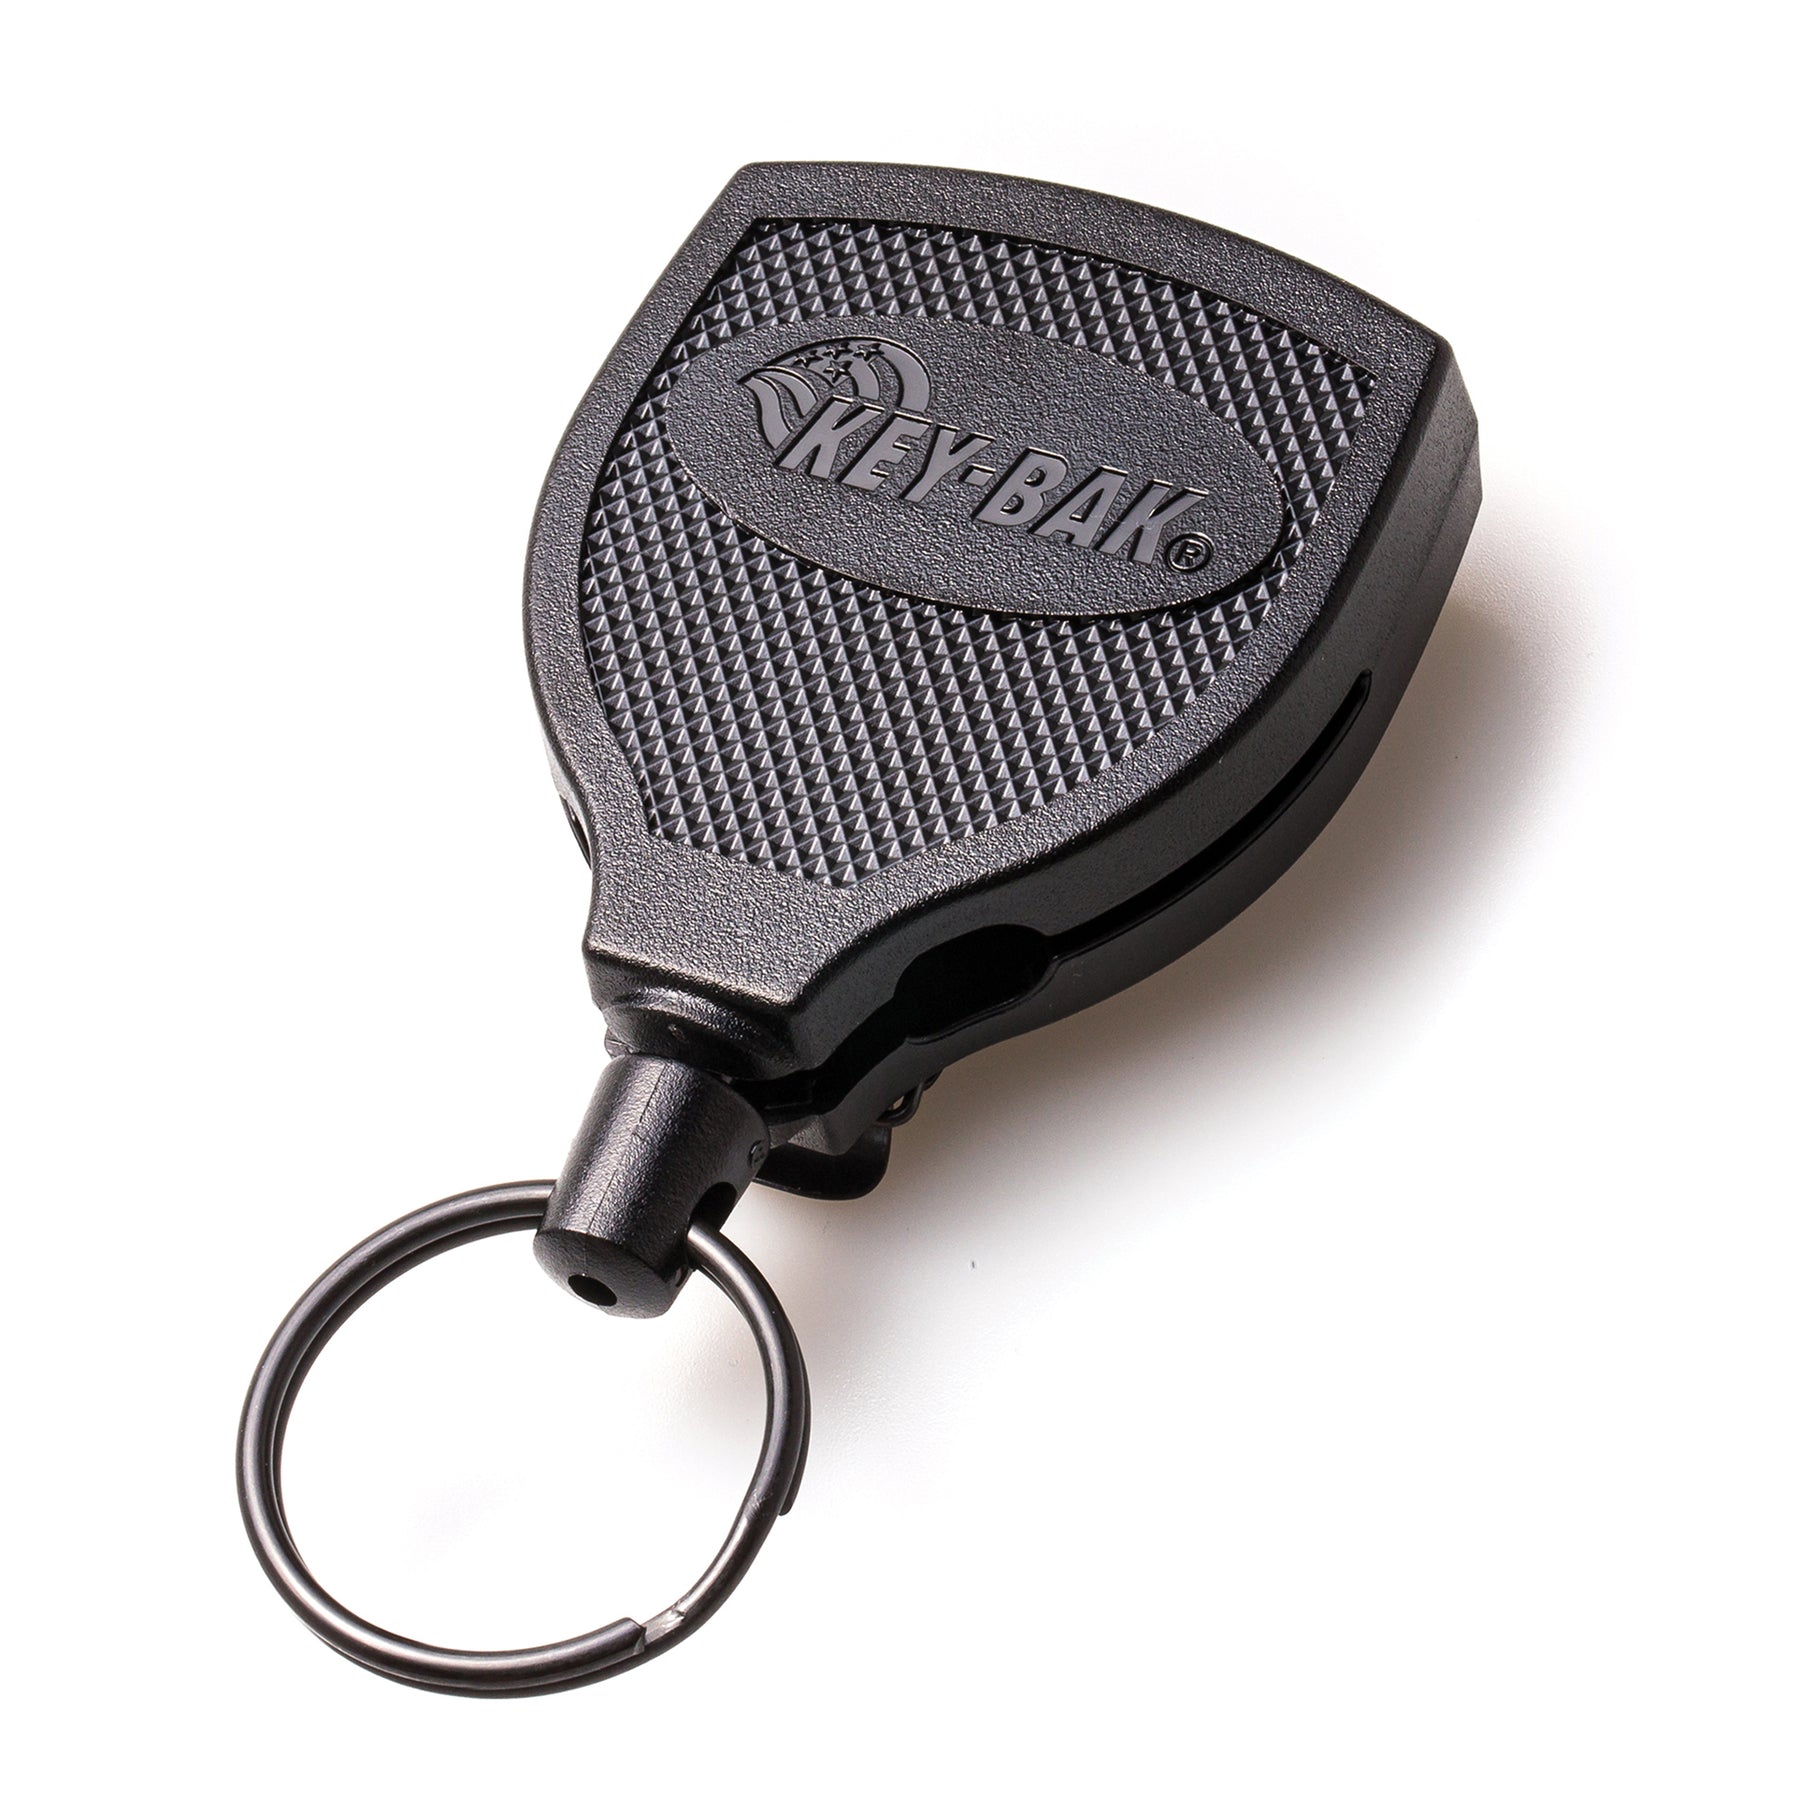 Extra Strength Large Key Tag with Split Ring